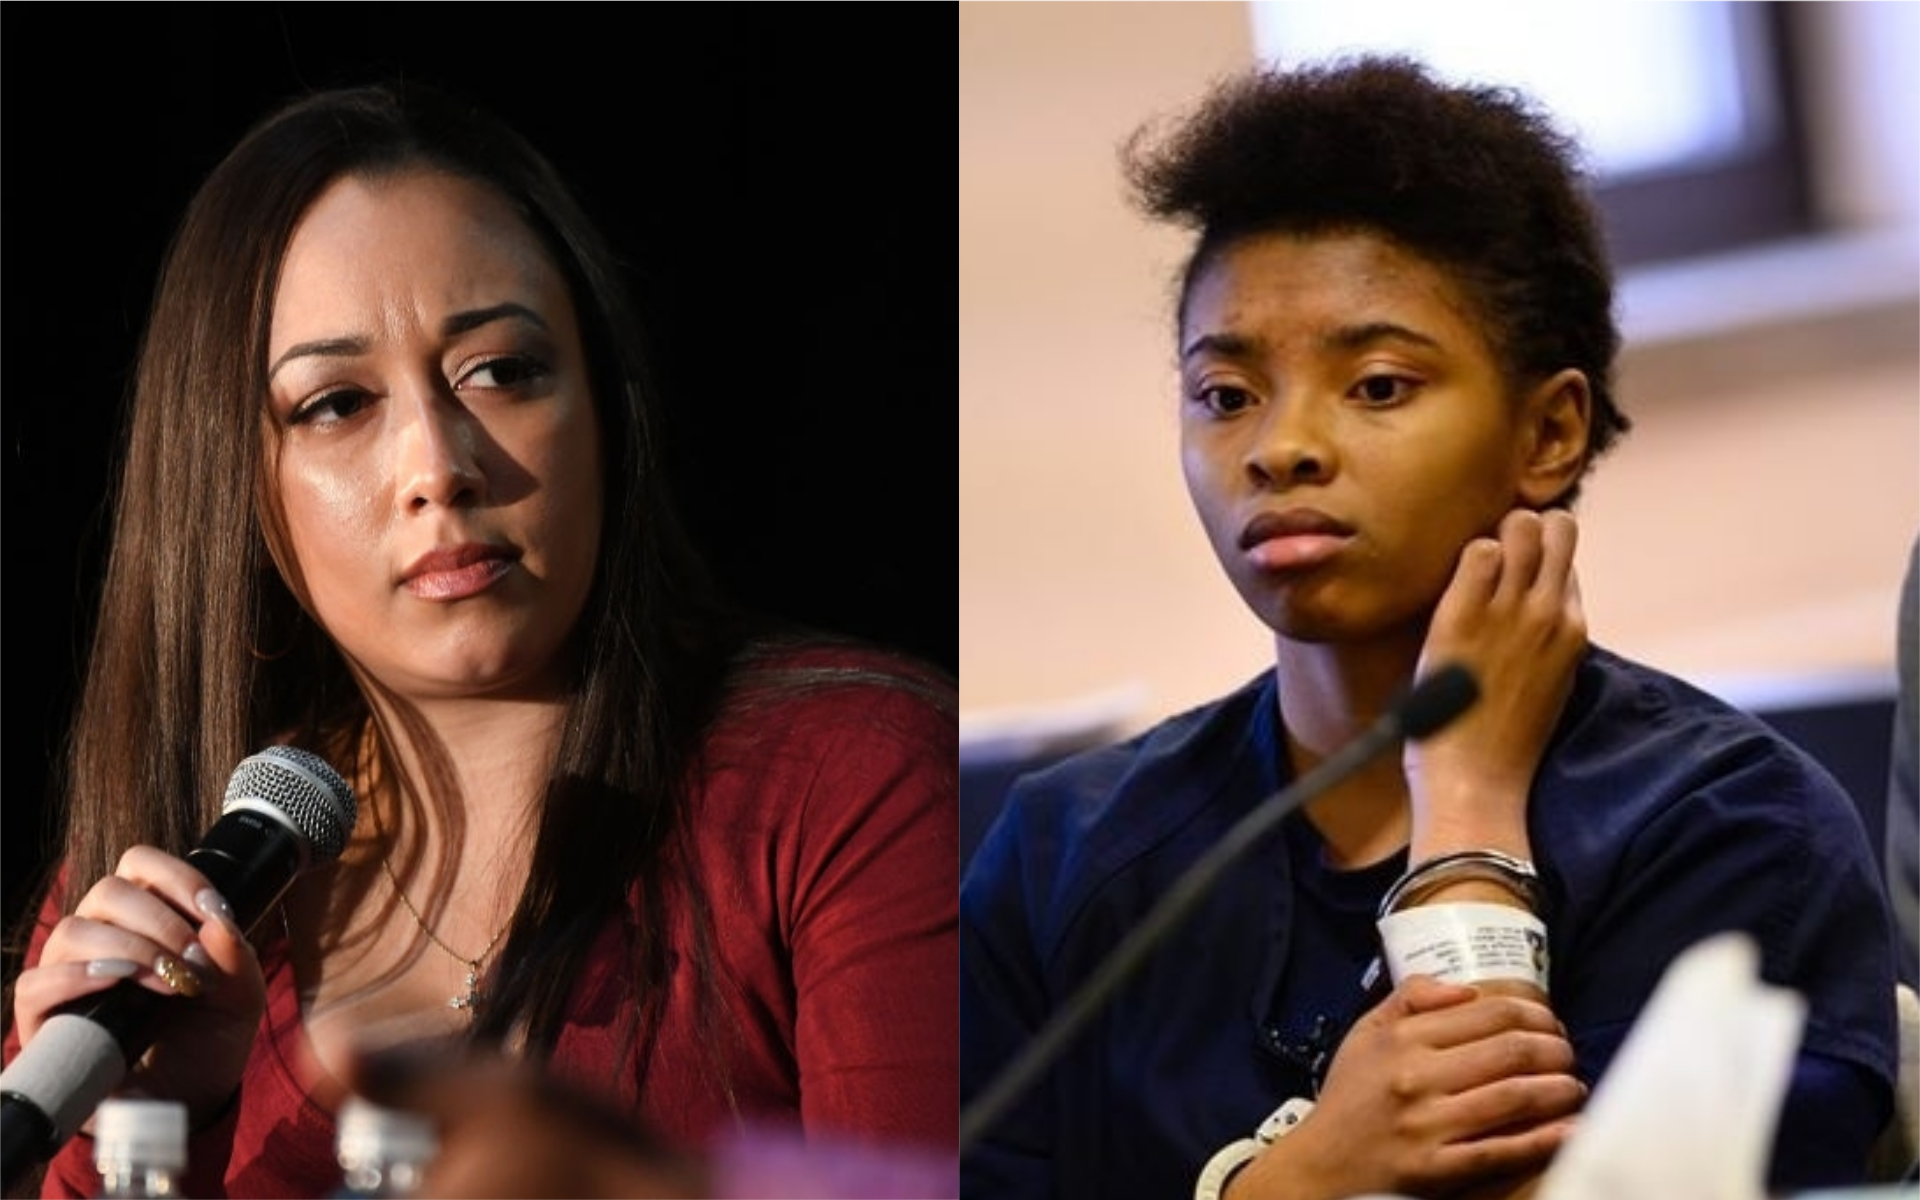 Cyntoia Brown-Long Shows Solidarity With 19-Year-Old Sex Trafficking Victim Chrystul Kizer, Whose Story Eerily Mirrors Her Own